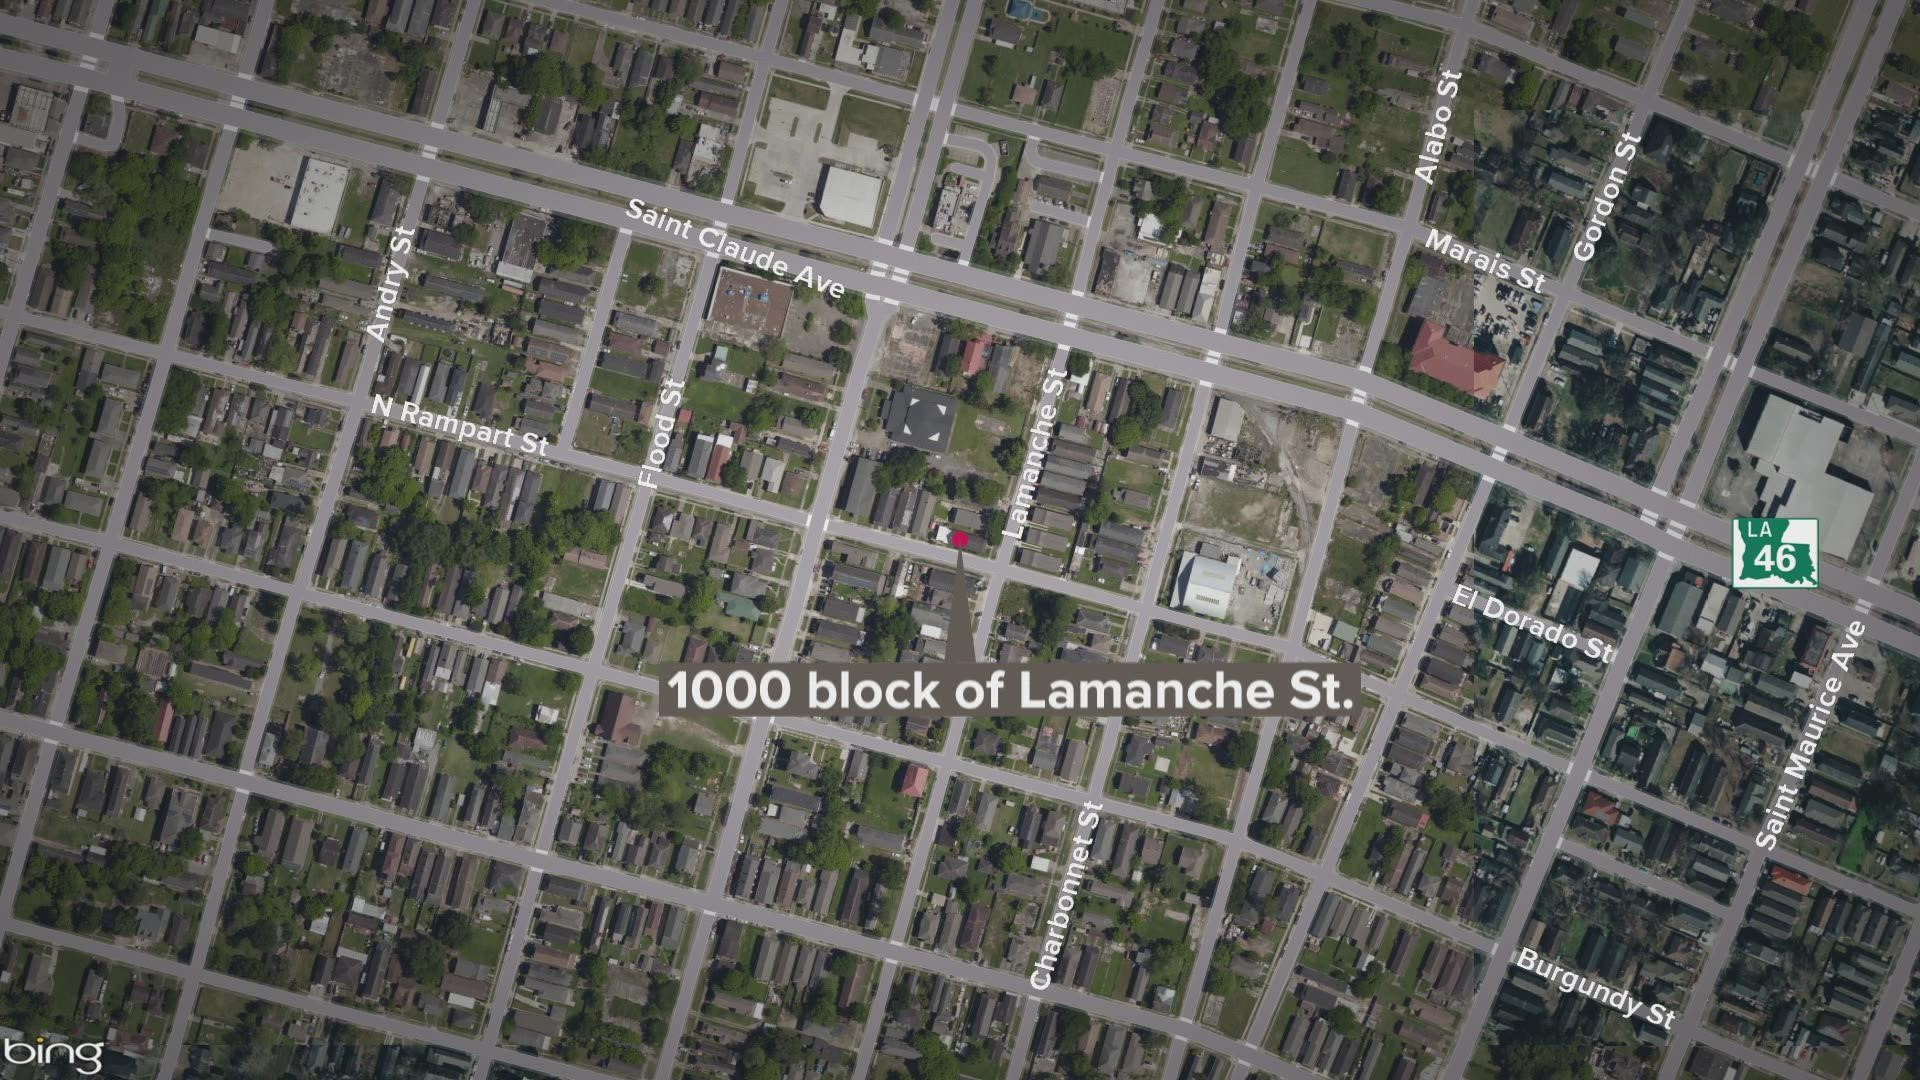 Investigators have arrested 32-year-old Dwayne D. Smith, just hours after the shooting took place in the 1000 block of Lamanche Street.